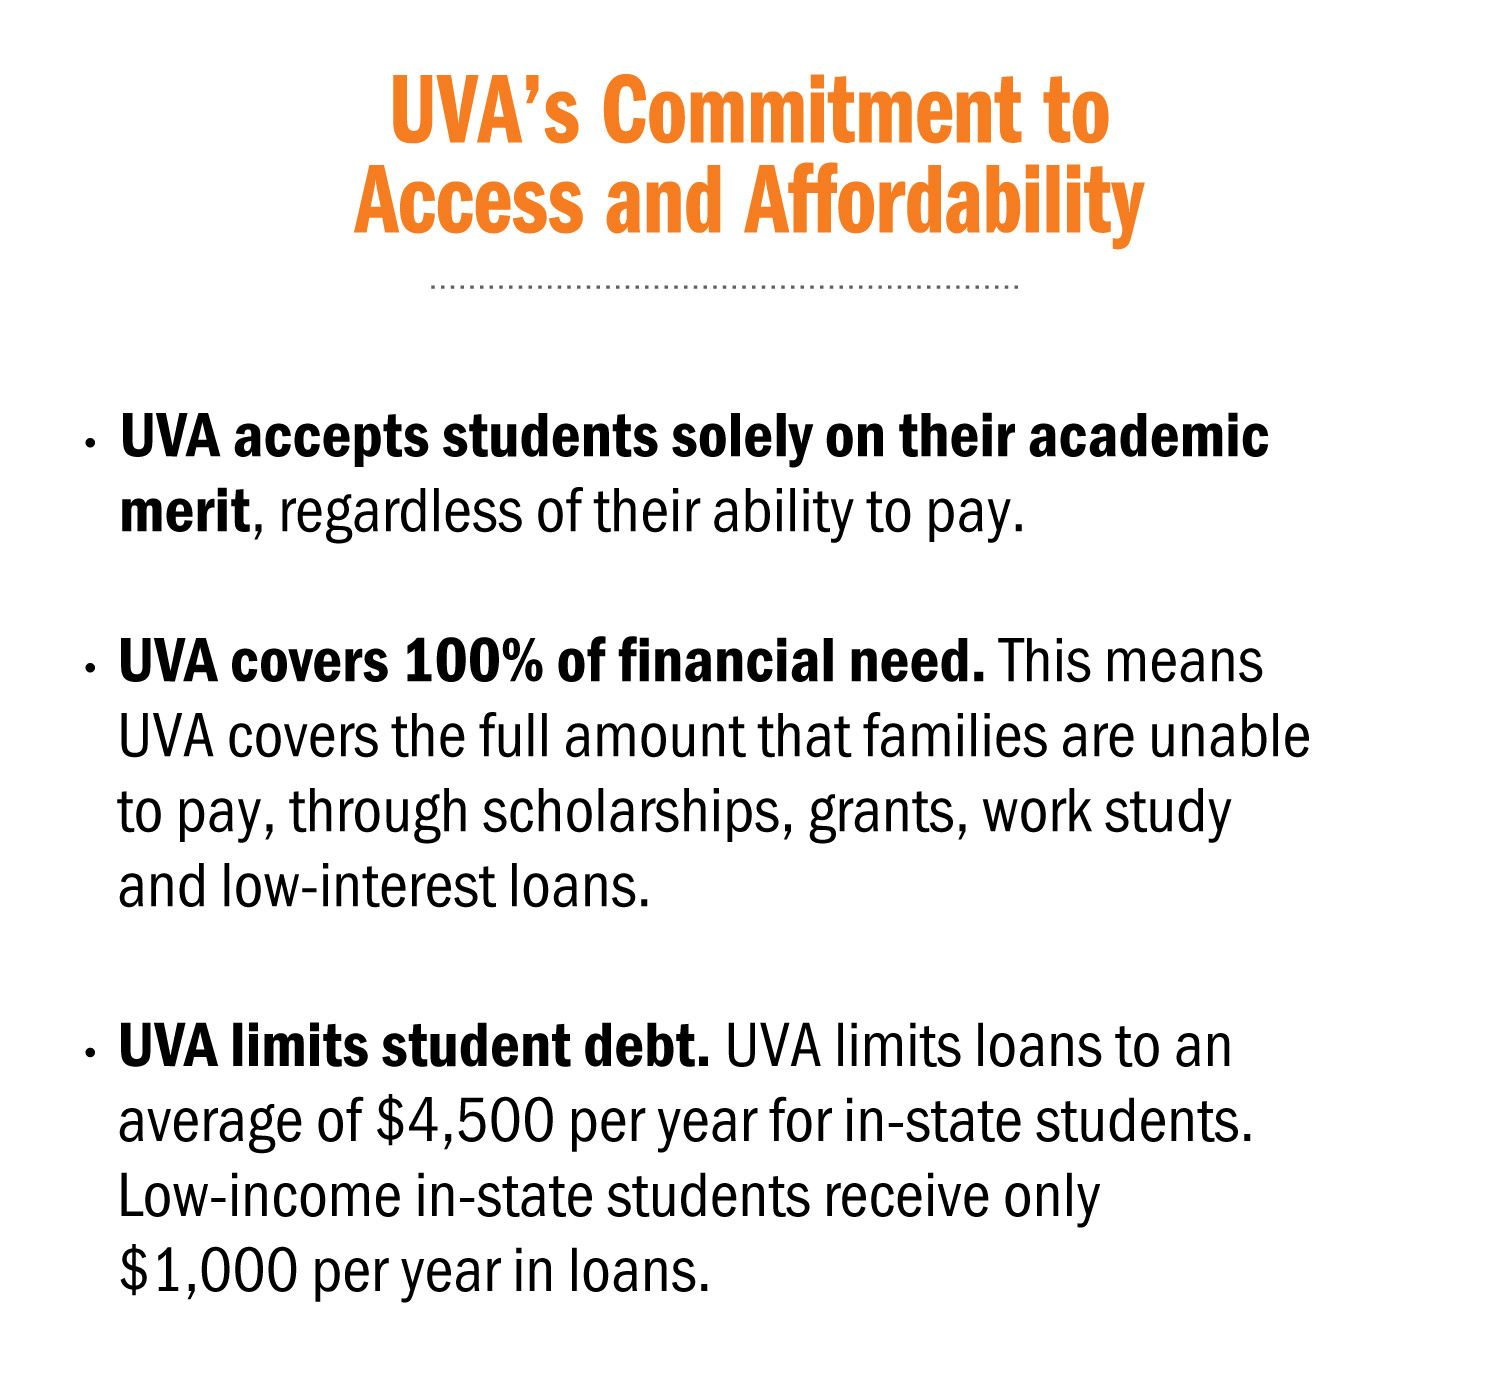 Text reads:UVA's commitment to Access and Affordability.  UVA accepts students solely on their academic merit, regardless of their ability to pay. UVA covers 100% of financial need.  This means UVA covers the full amount that families are unable to pay, through scholarships, grants, work study, and low-interest loans. UVA limits student debt.  UVA limits loans to an average of 4500 per year for in-state students.  Low-income in-state students receive only 1000 per year in loans